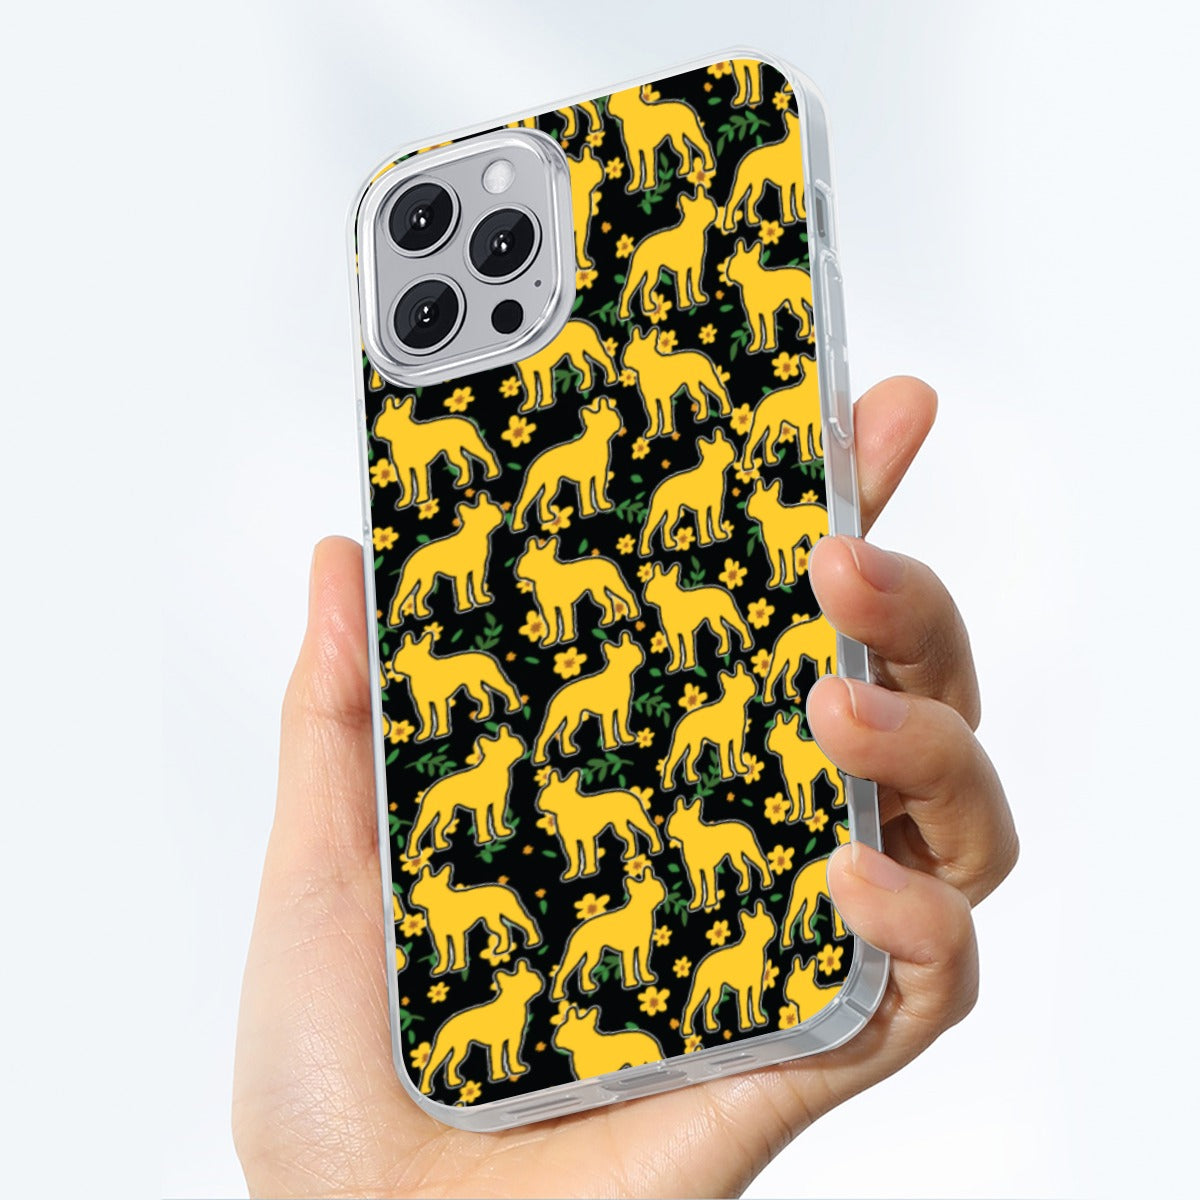 Lucy - iPhone case for Boston Terrier lovers